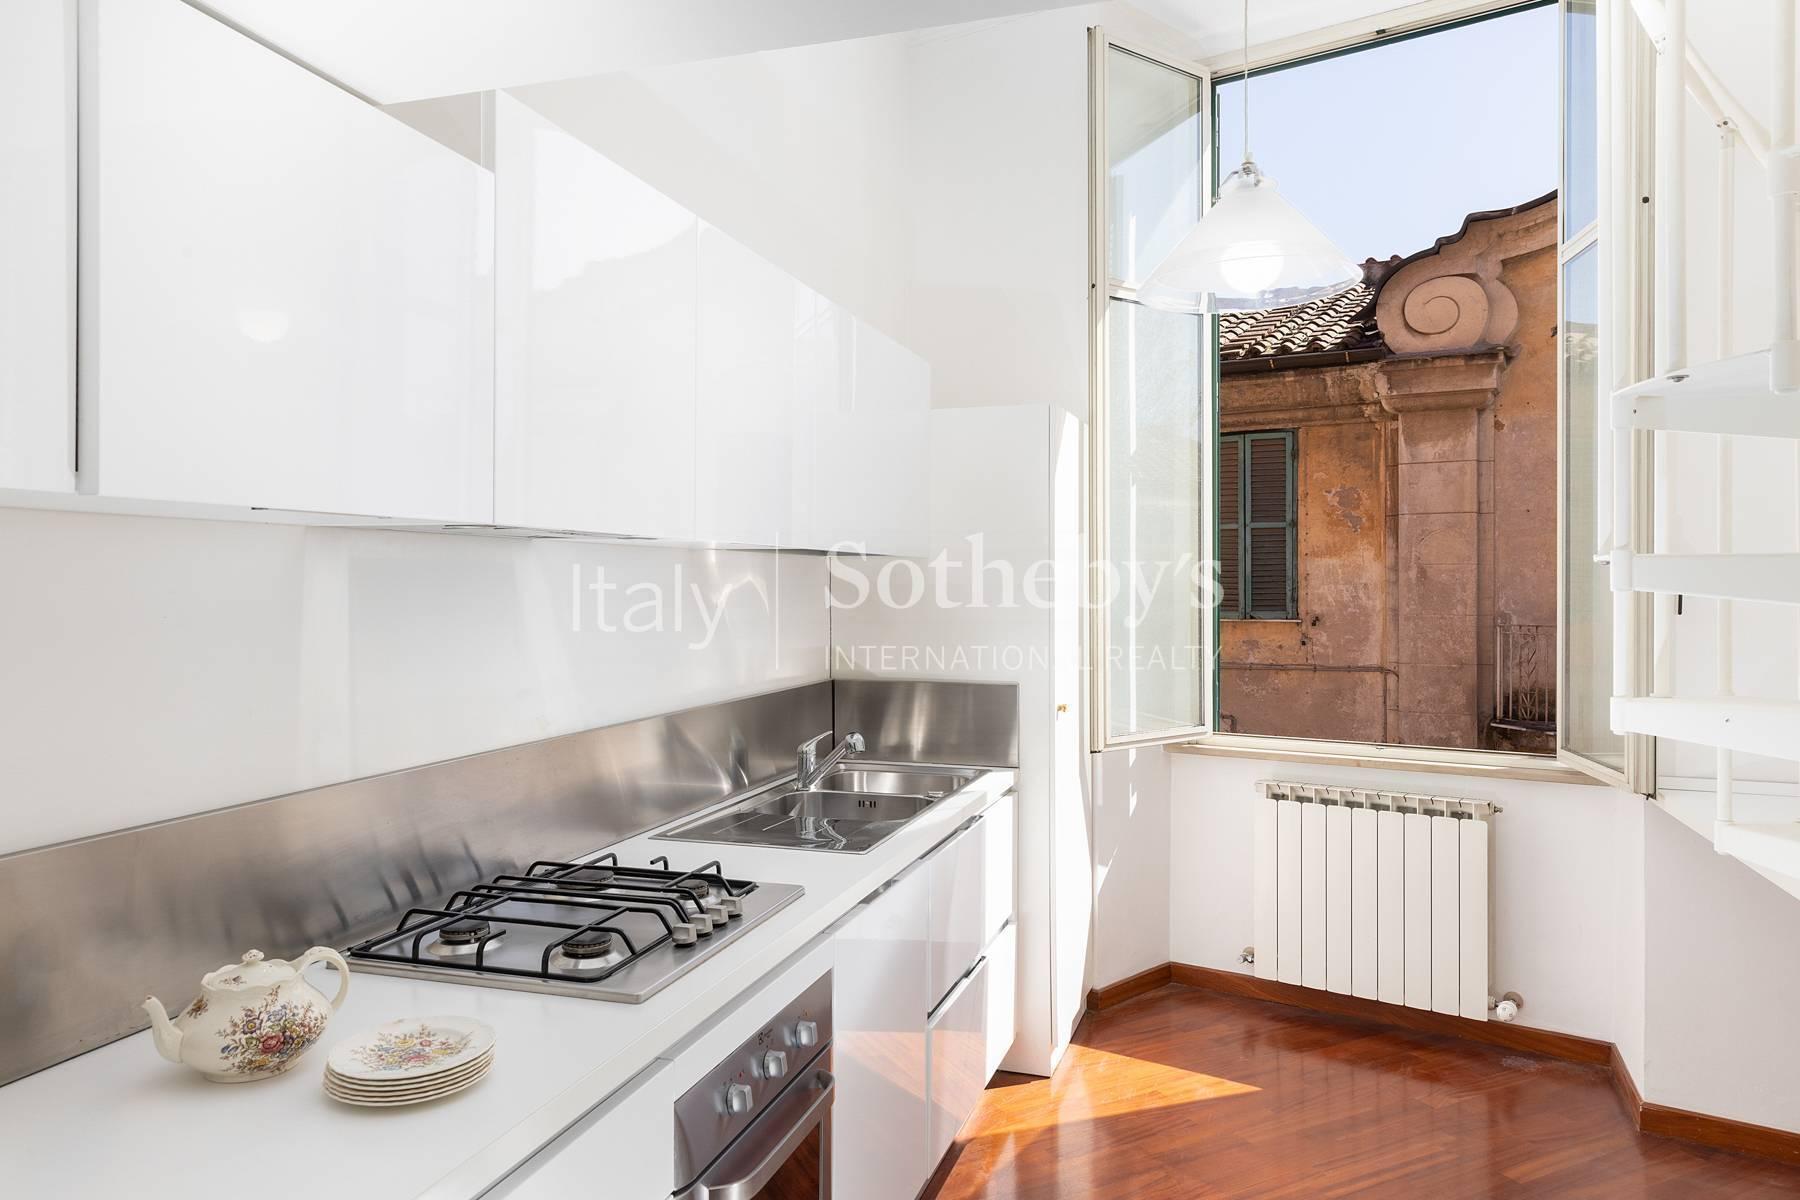 Stunning views for this bright flat close to the Colosseum - 5